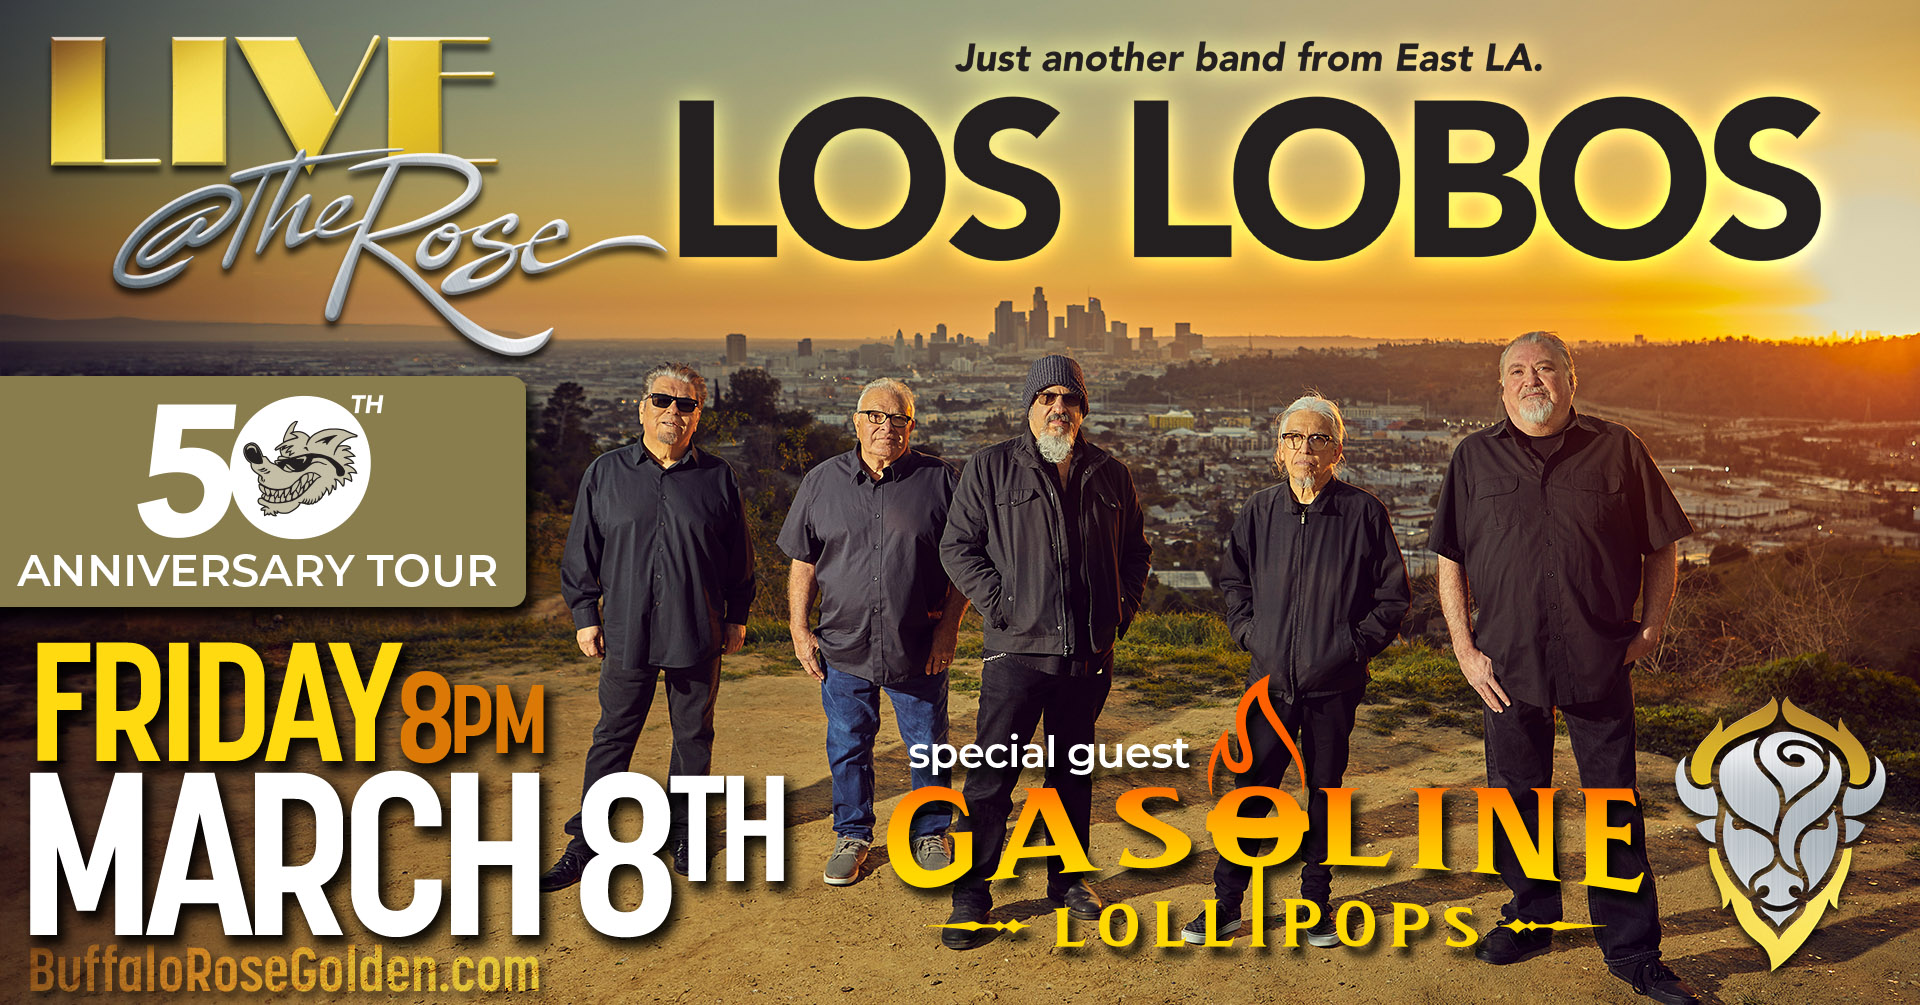 Los Lobos 50th Anniversary Tour March 8th LIVE at the Rose